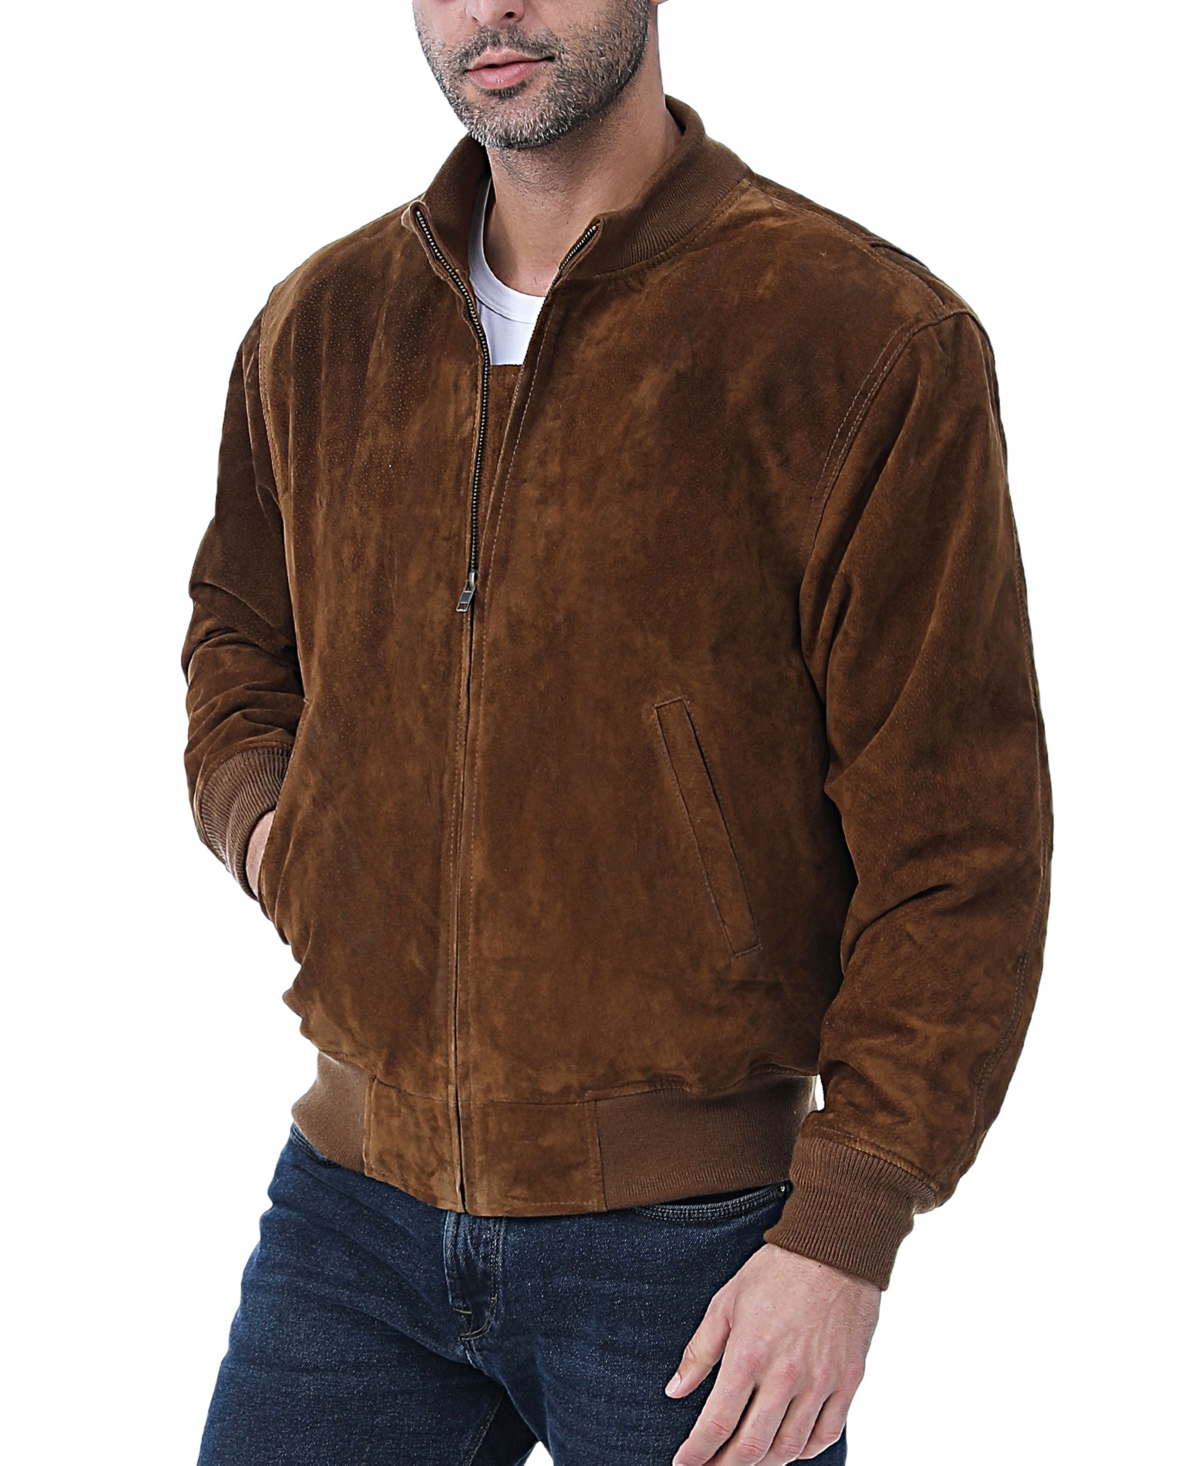 Men Wwii Suede Leather Tanker Jacket - Big and Tall - Tobacco